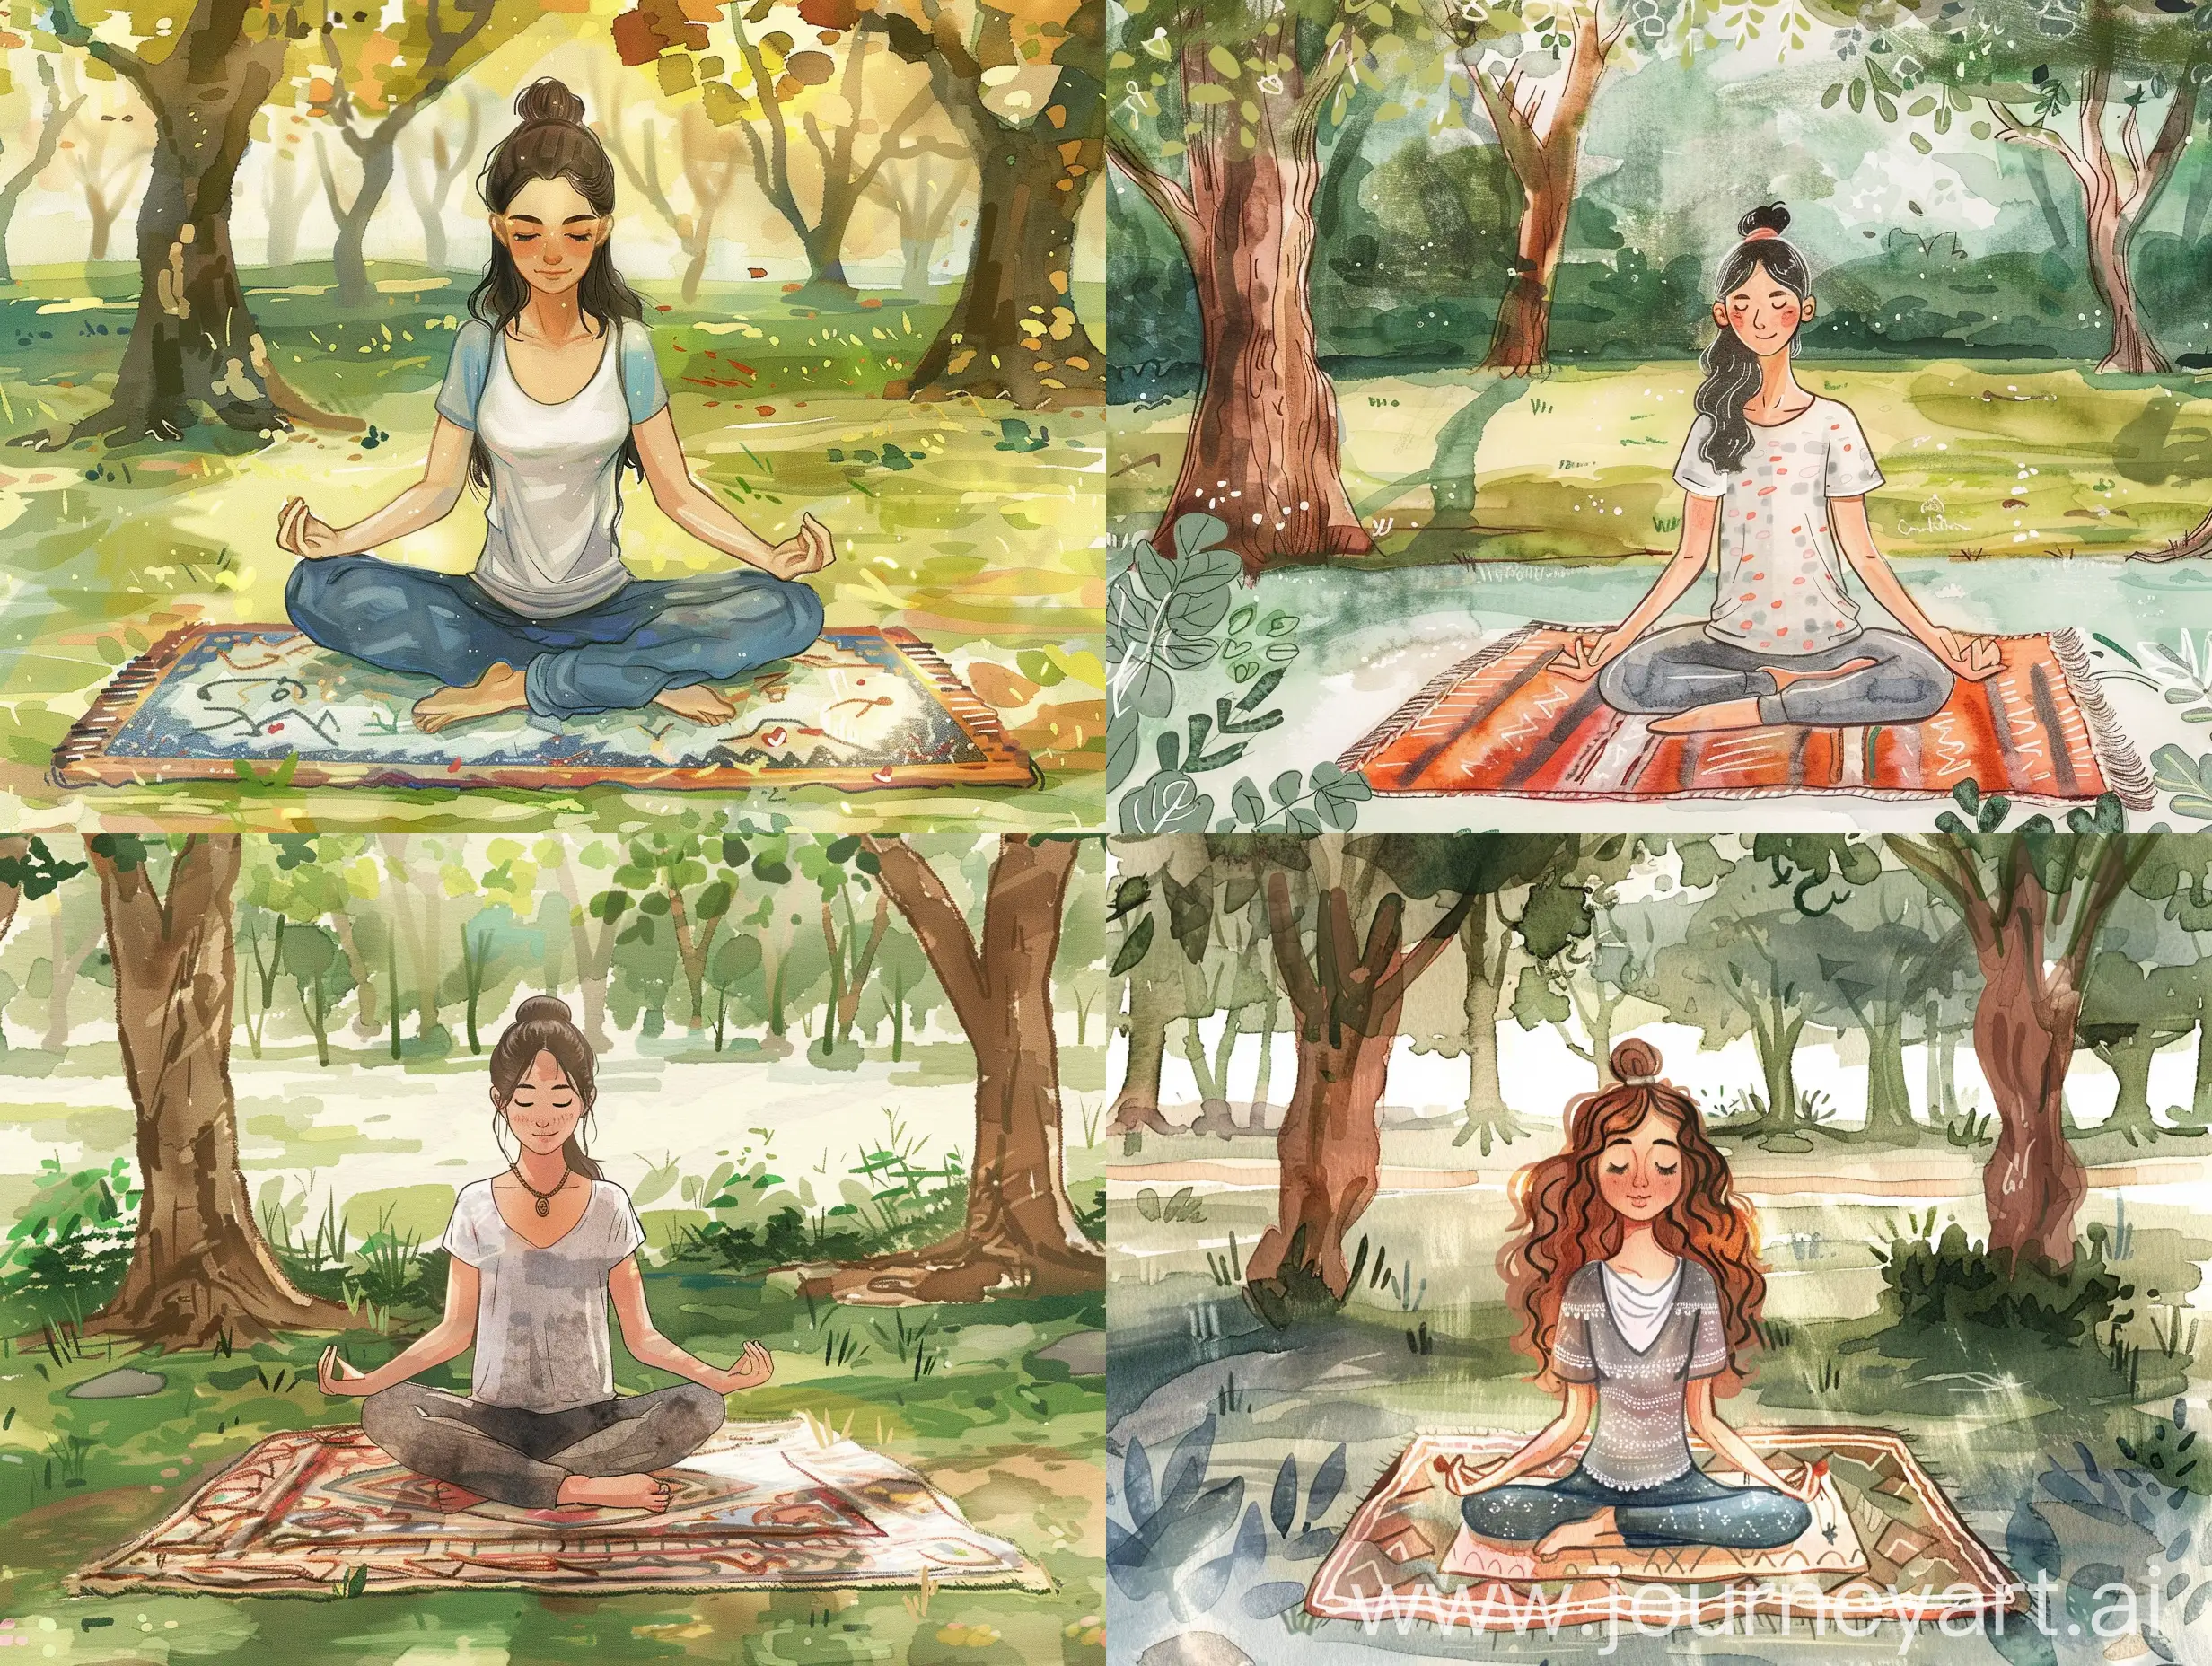 Yogi-Girl-Meditating-in-Lotus-Position-on-Rug-in-Park-Clearing